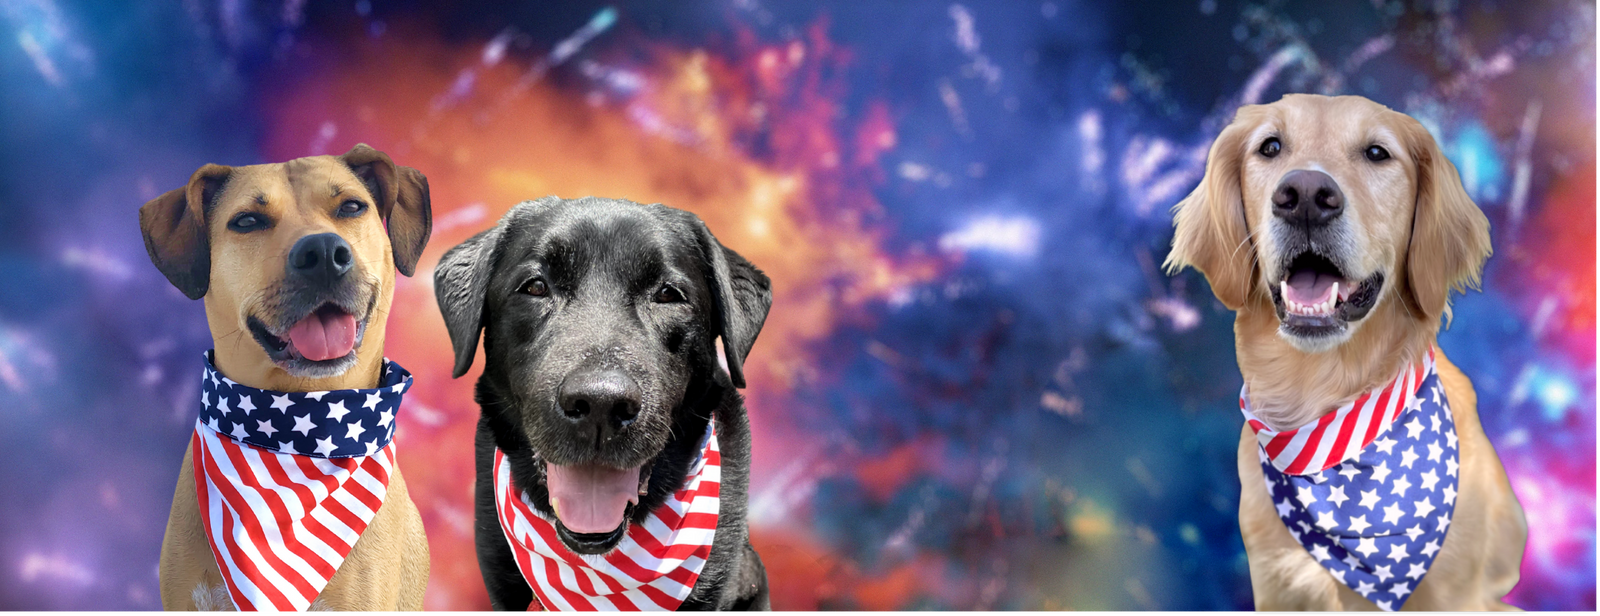 Keeping Pets Calm and Safe During Fourth of July Celebrations